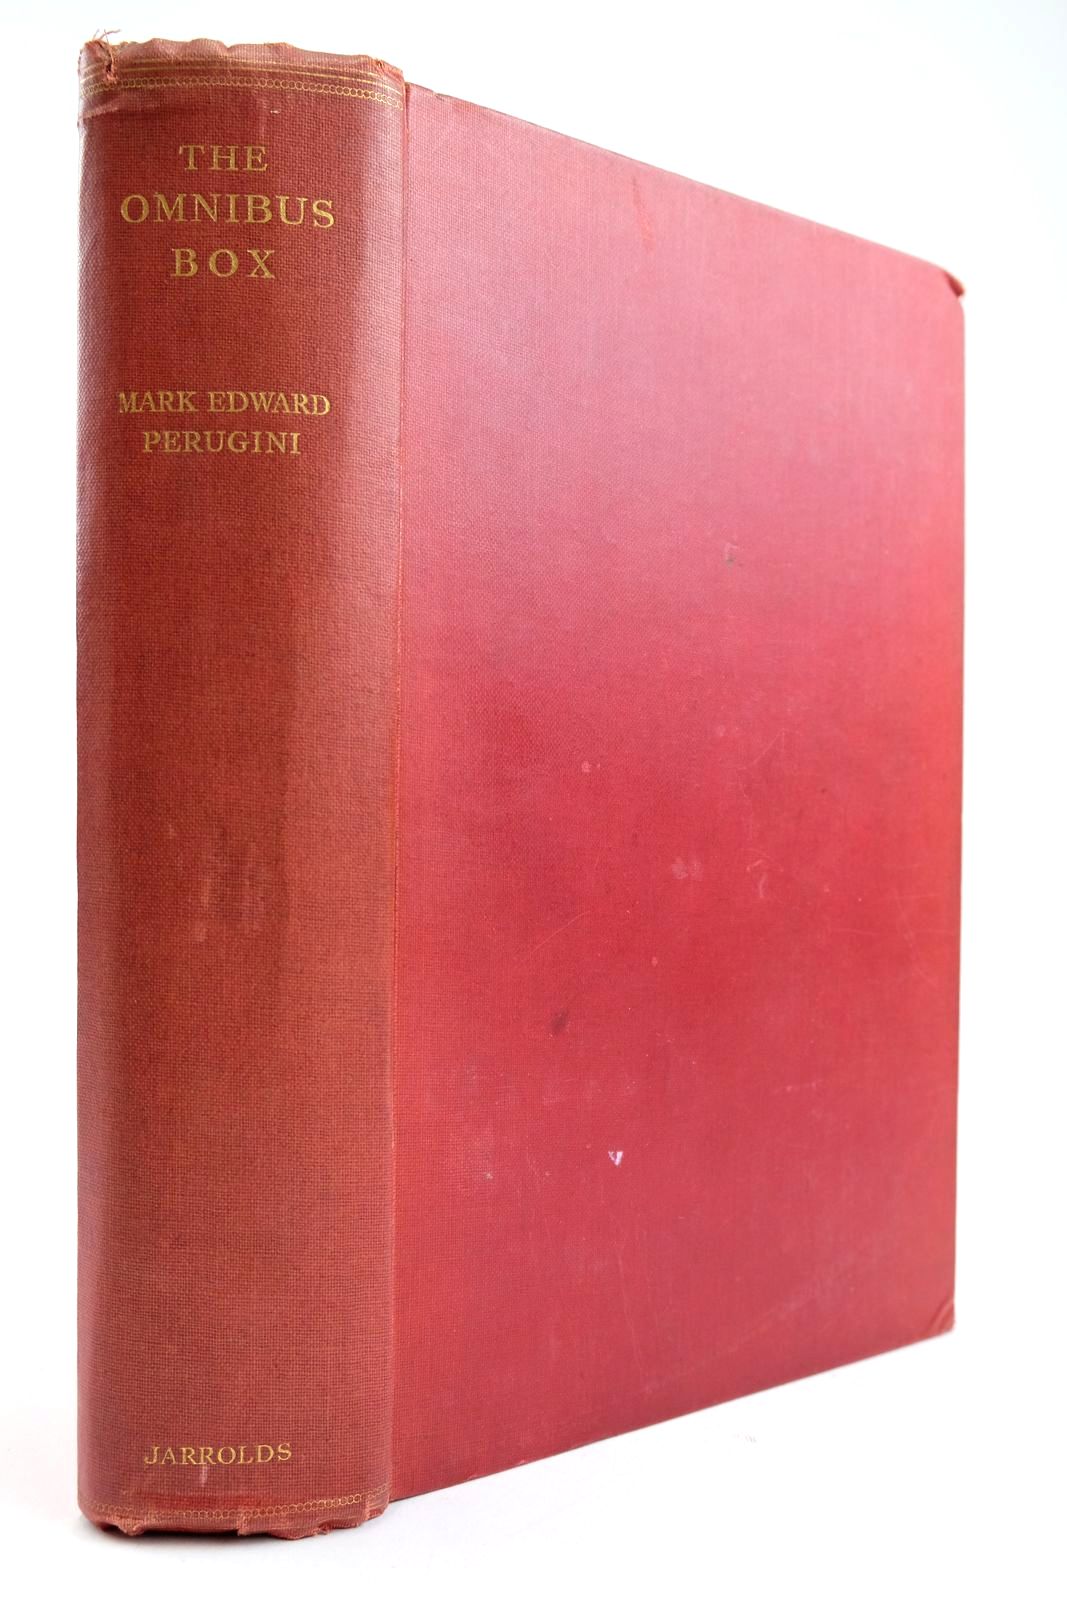 Photo of THE OMNIBUS BOX: BEING DIGRESSIONS AND ASIDES ON SOCIAL AND THEATRICAL LIFE IN LONDON AND PARIS, 1830-1850 written by Perugini, Mark Edward published by Jarrolds Publishers (STOCK CODE: 2134003)  for sale by Stella & Rose's Books